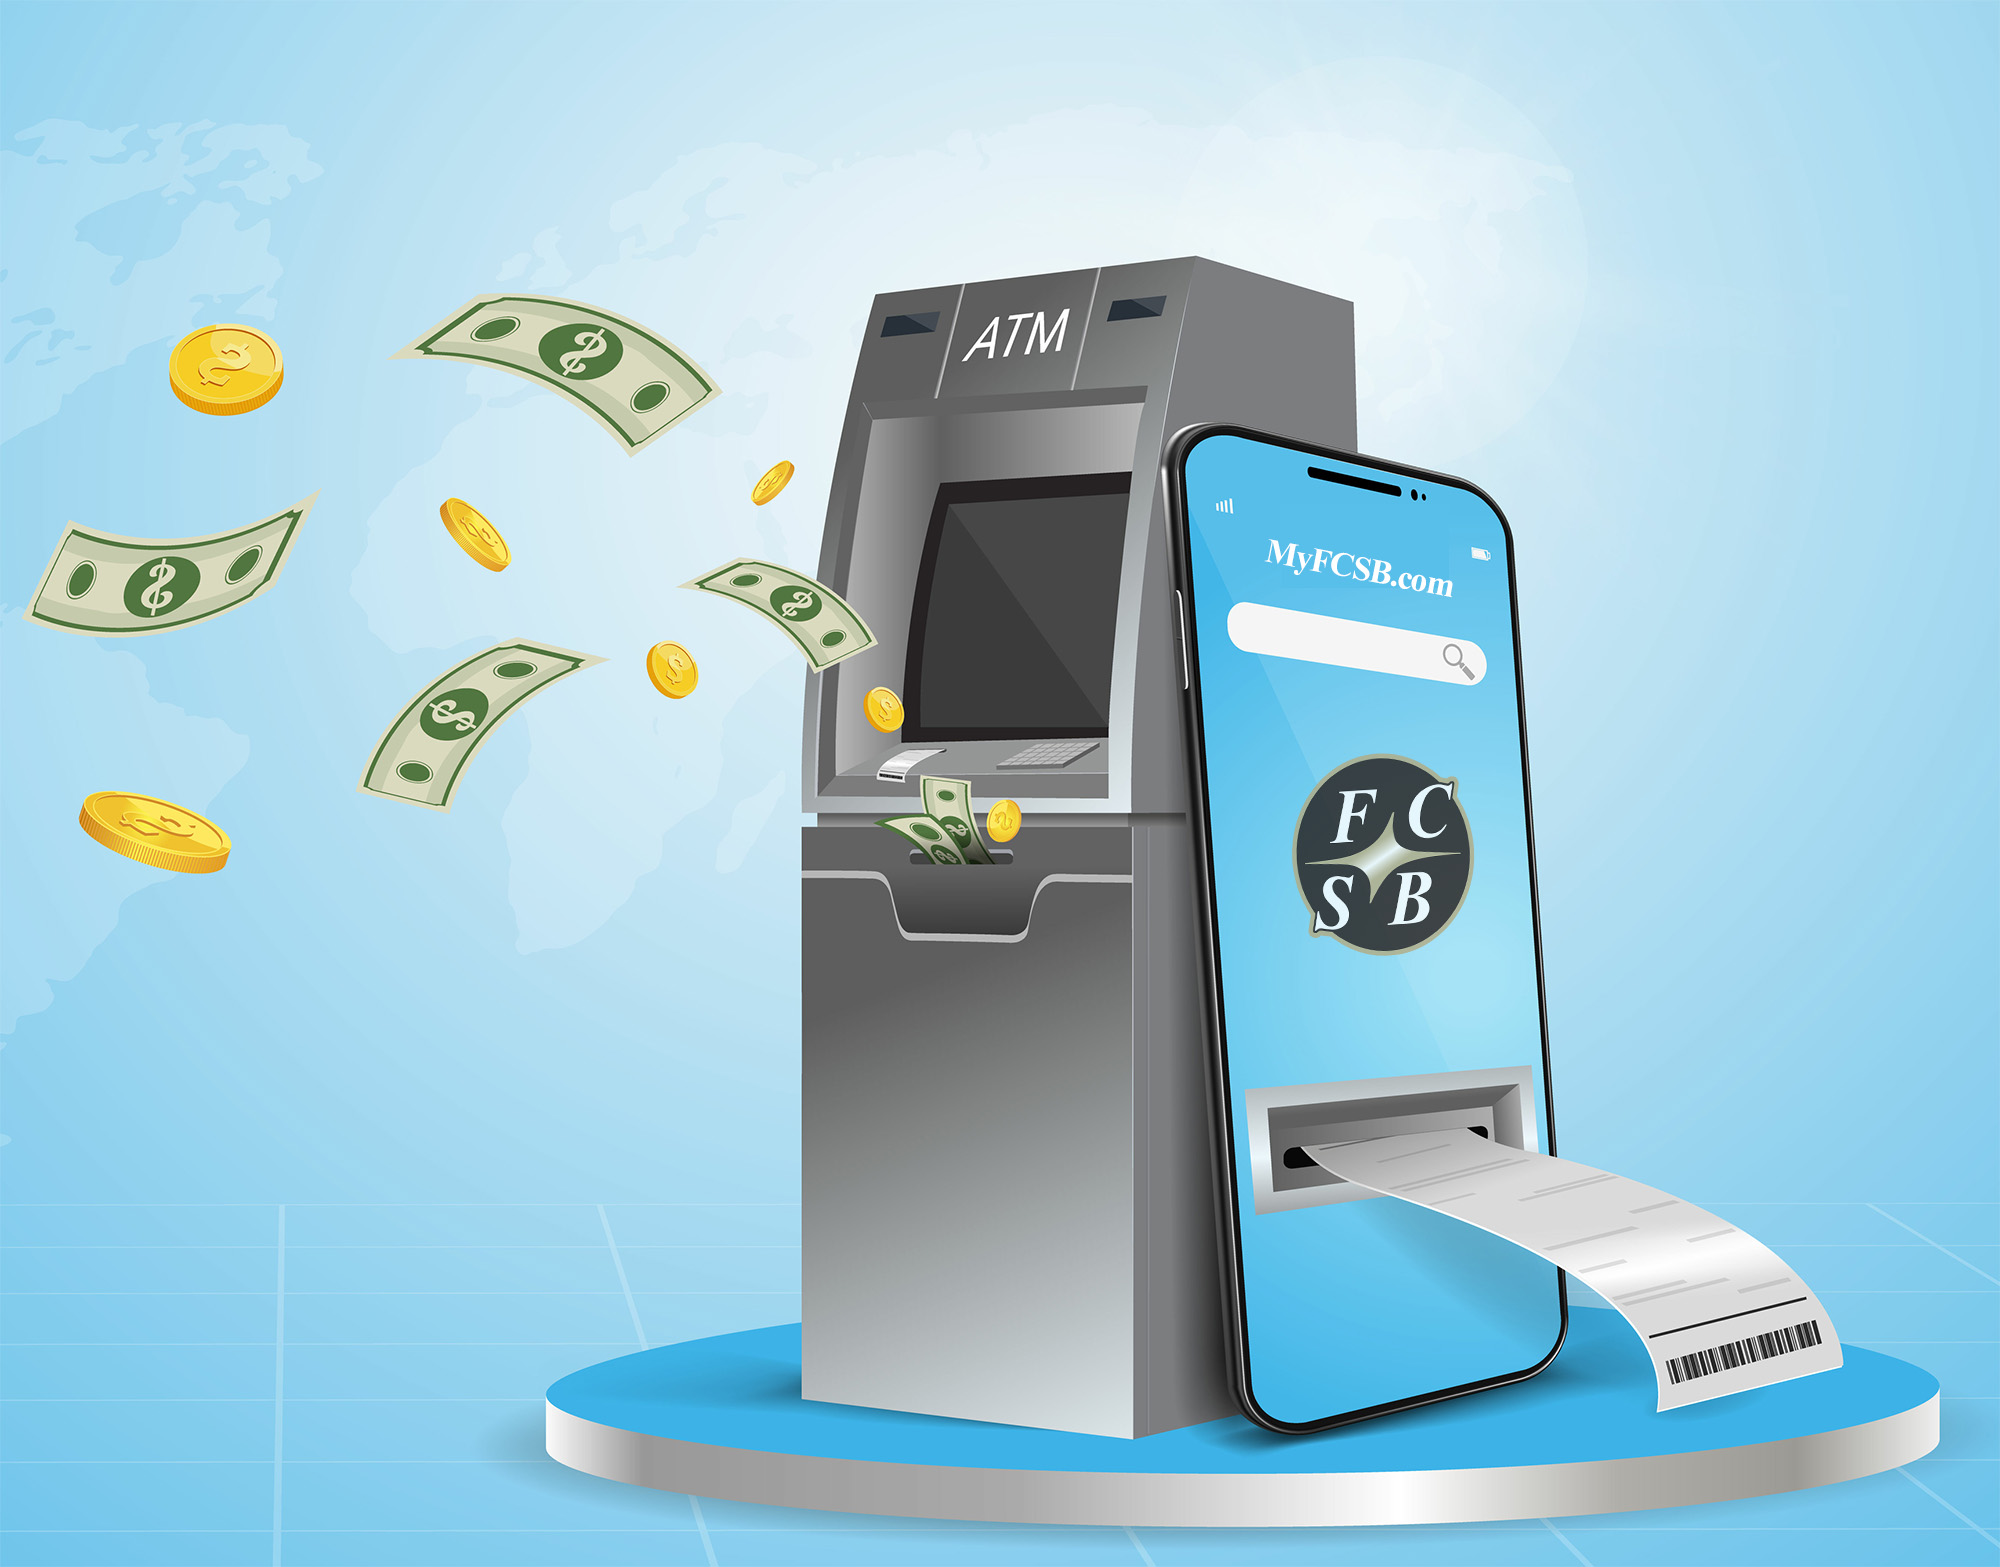 Illustration of an ATM and a phone showing the FCSB Mobile app.